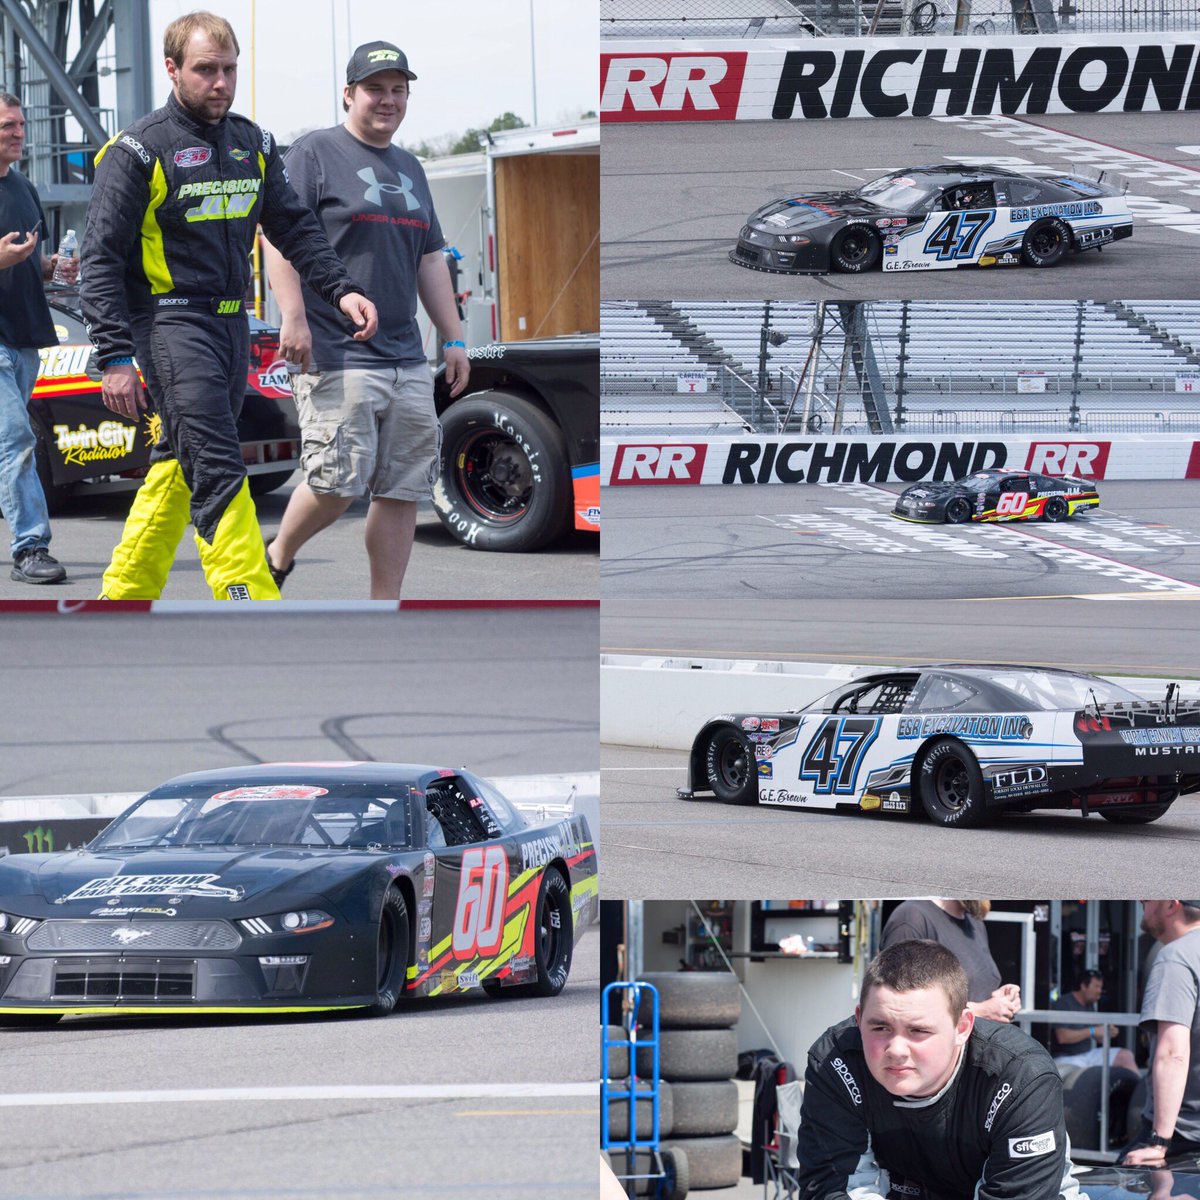 Weekend in review @PASSSLM14 #CommonWealthClassic @RichmondRaceway with Drivers @djshaw60 & @GabeBrown47 
#PASS2K19 #CommonWealthClassic #GBR #HeyNiceBody @FiveStarBodies